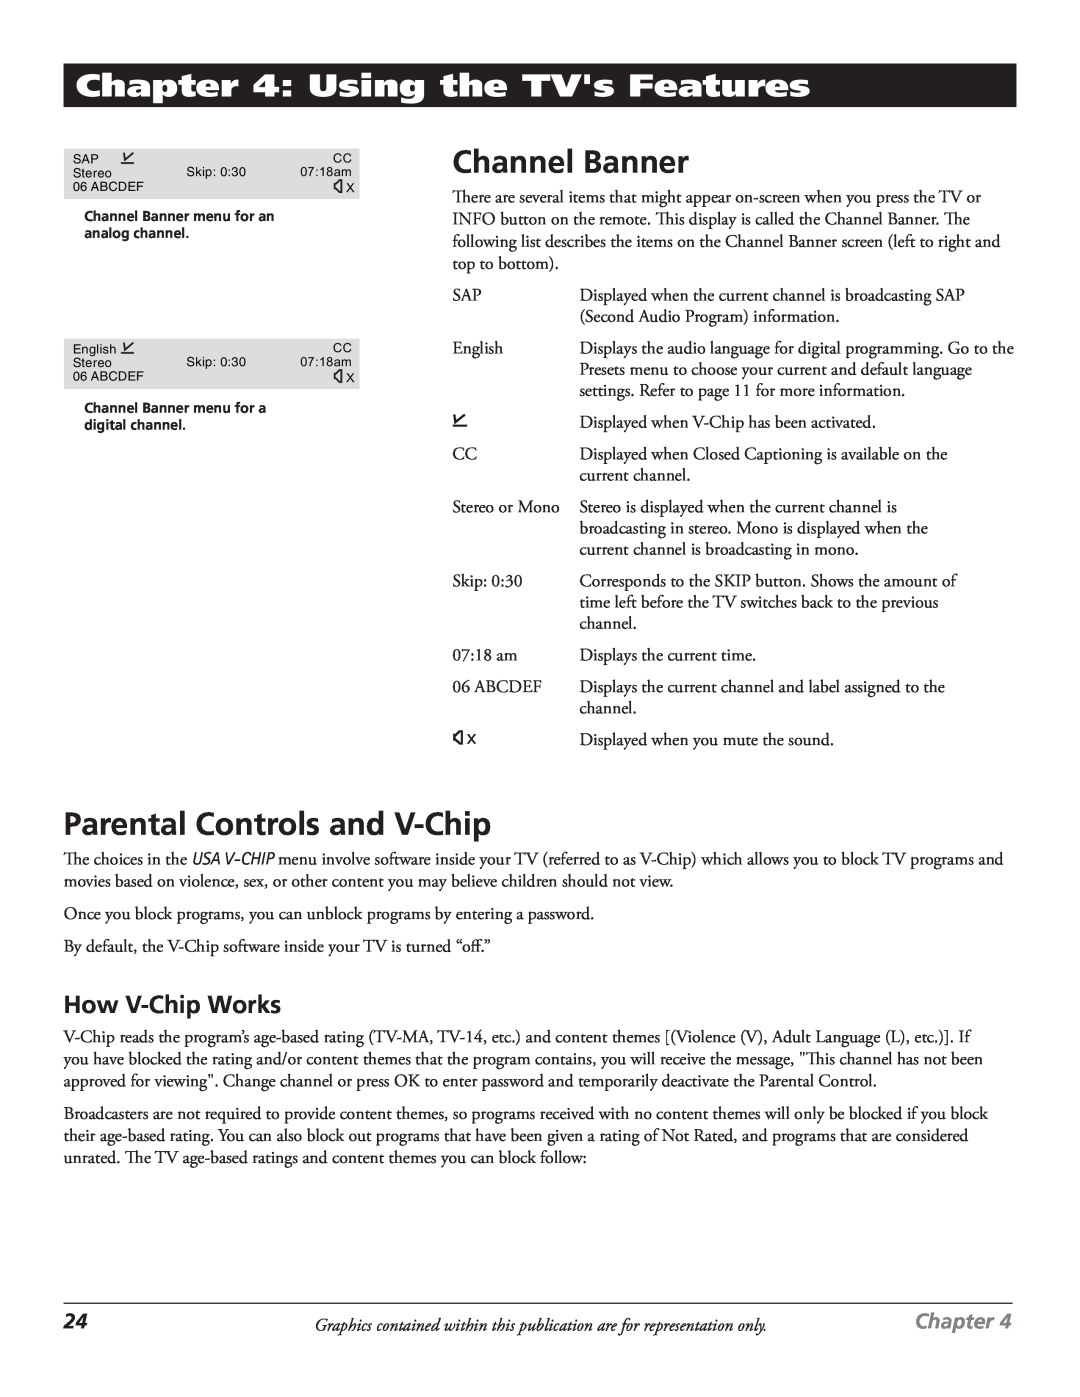 RCA J27F636 manual Using the TVs Features, Channel Banner, Parental Controls and V-Chip, How V-Chip Works, Chapter 